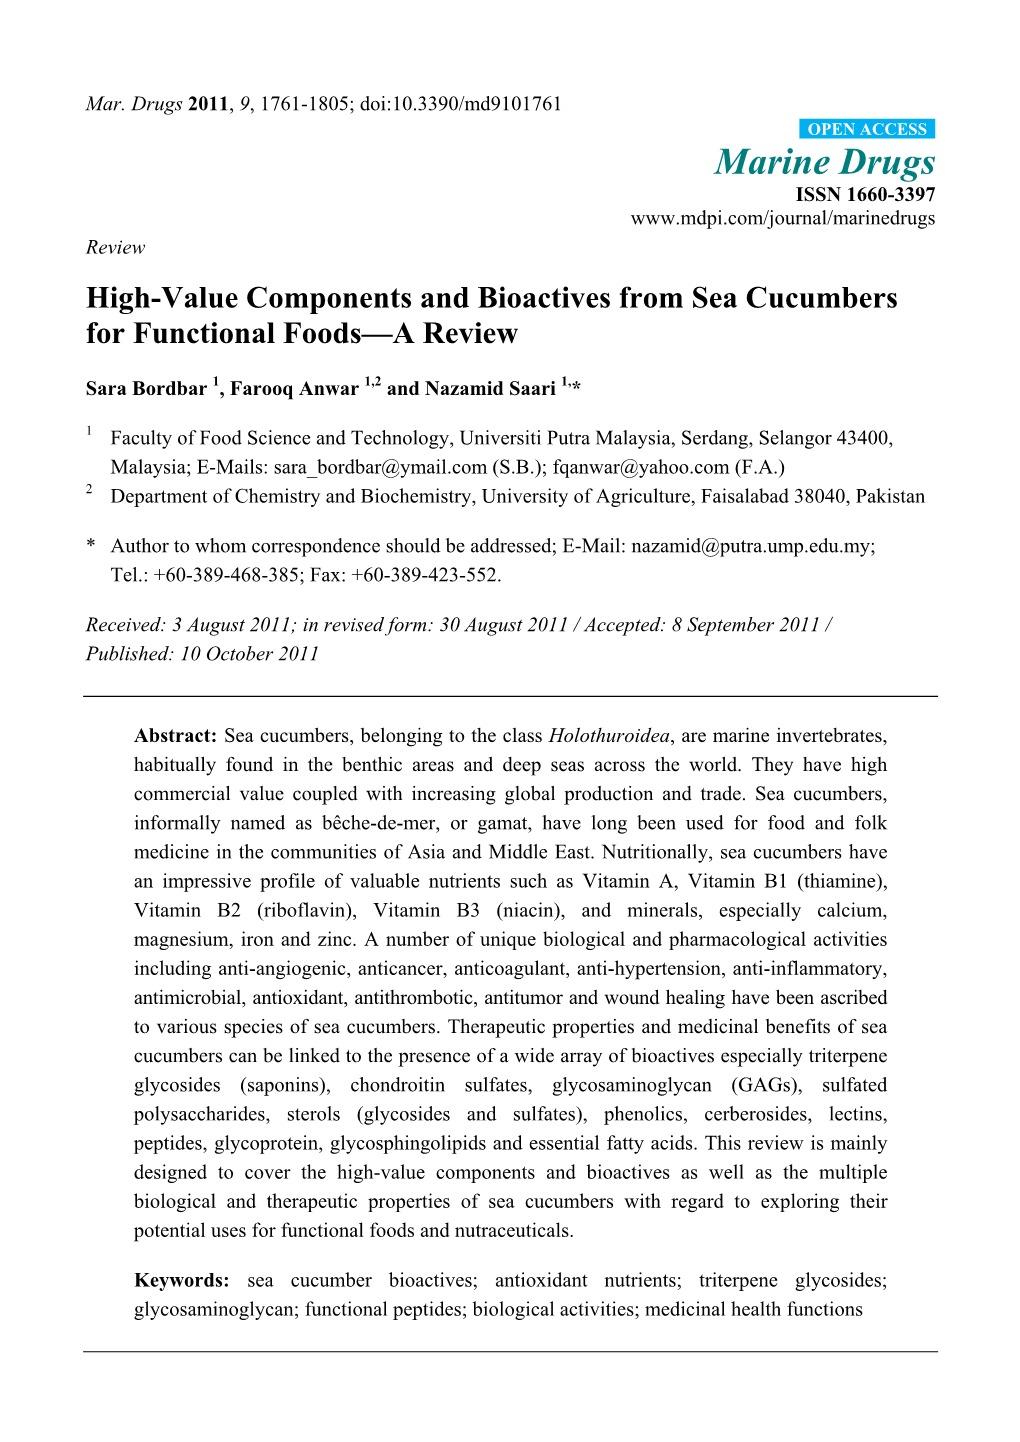 High-Value Components and Bioactives from Sea Cucumbers for Functional Foods—A Review